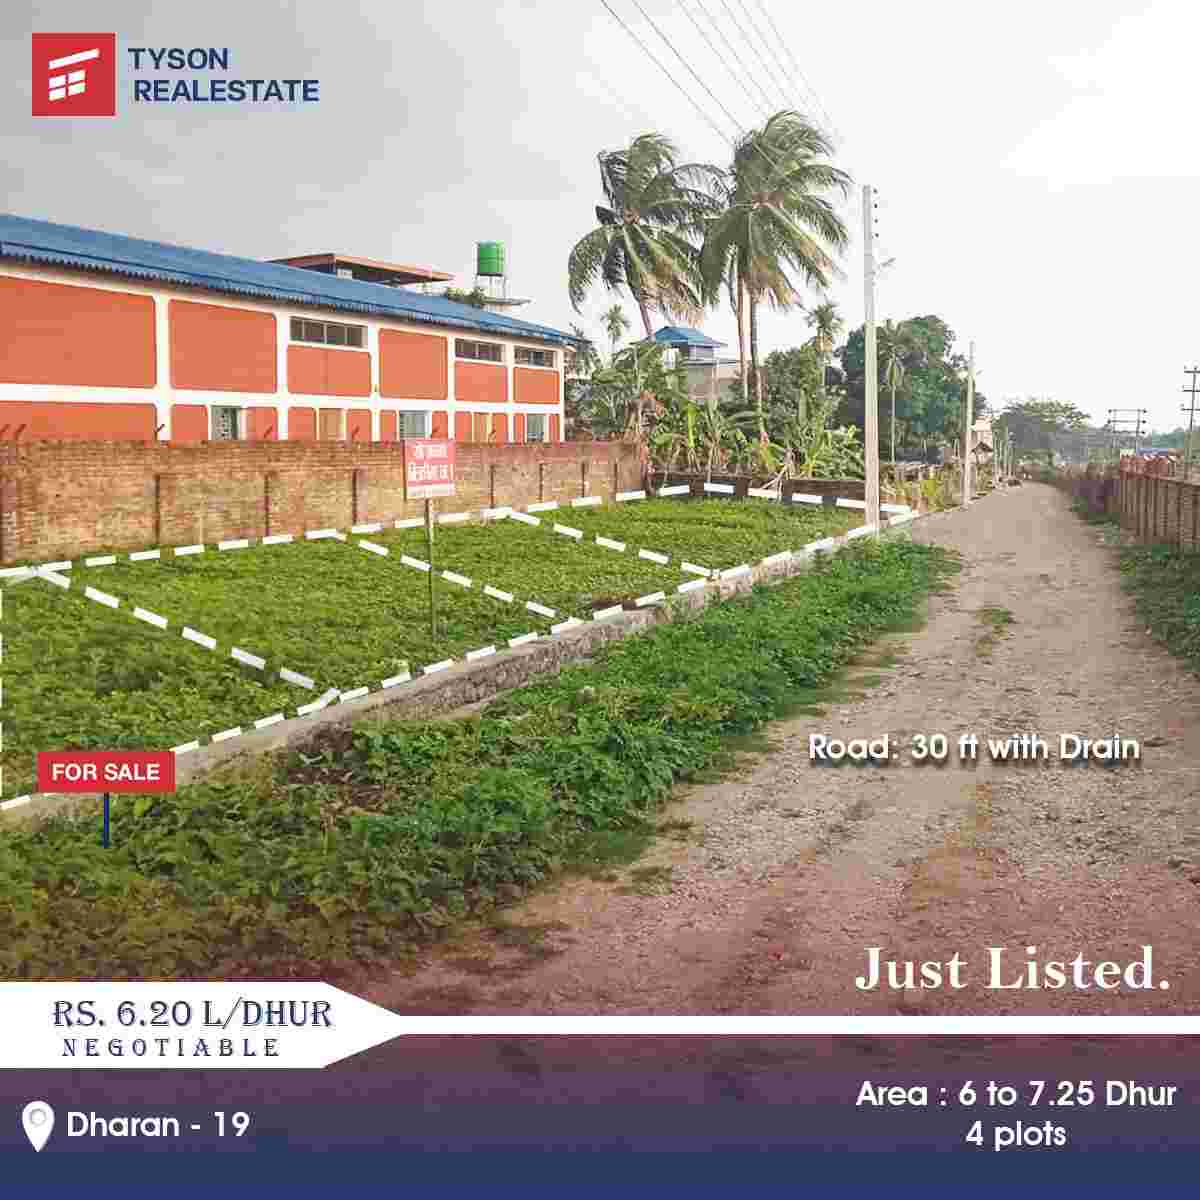 Plotted Land For Sale